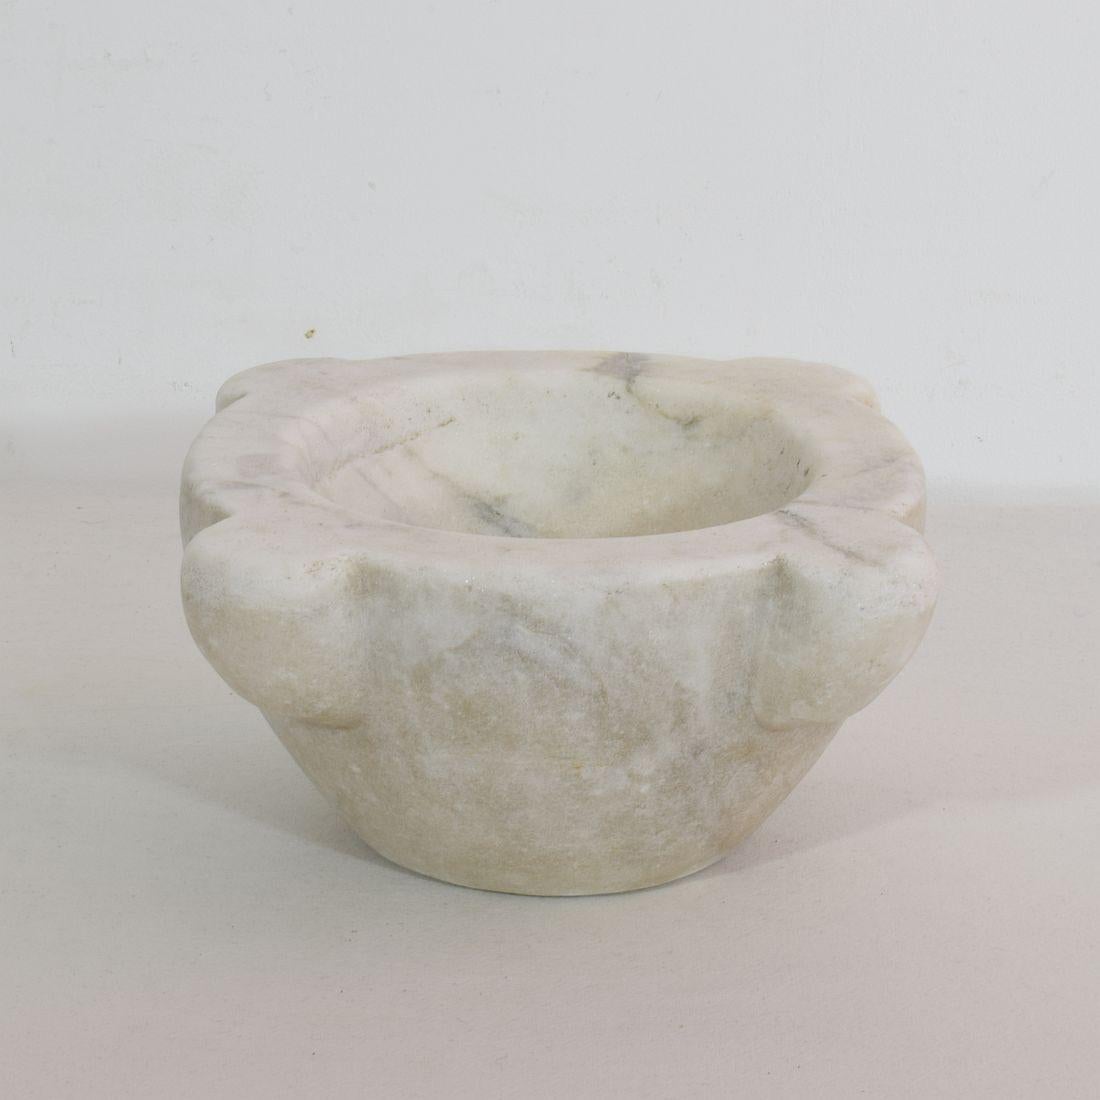 Beautiful white marble mortar, France, 18th century.
Extremely weathered.